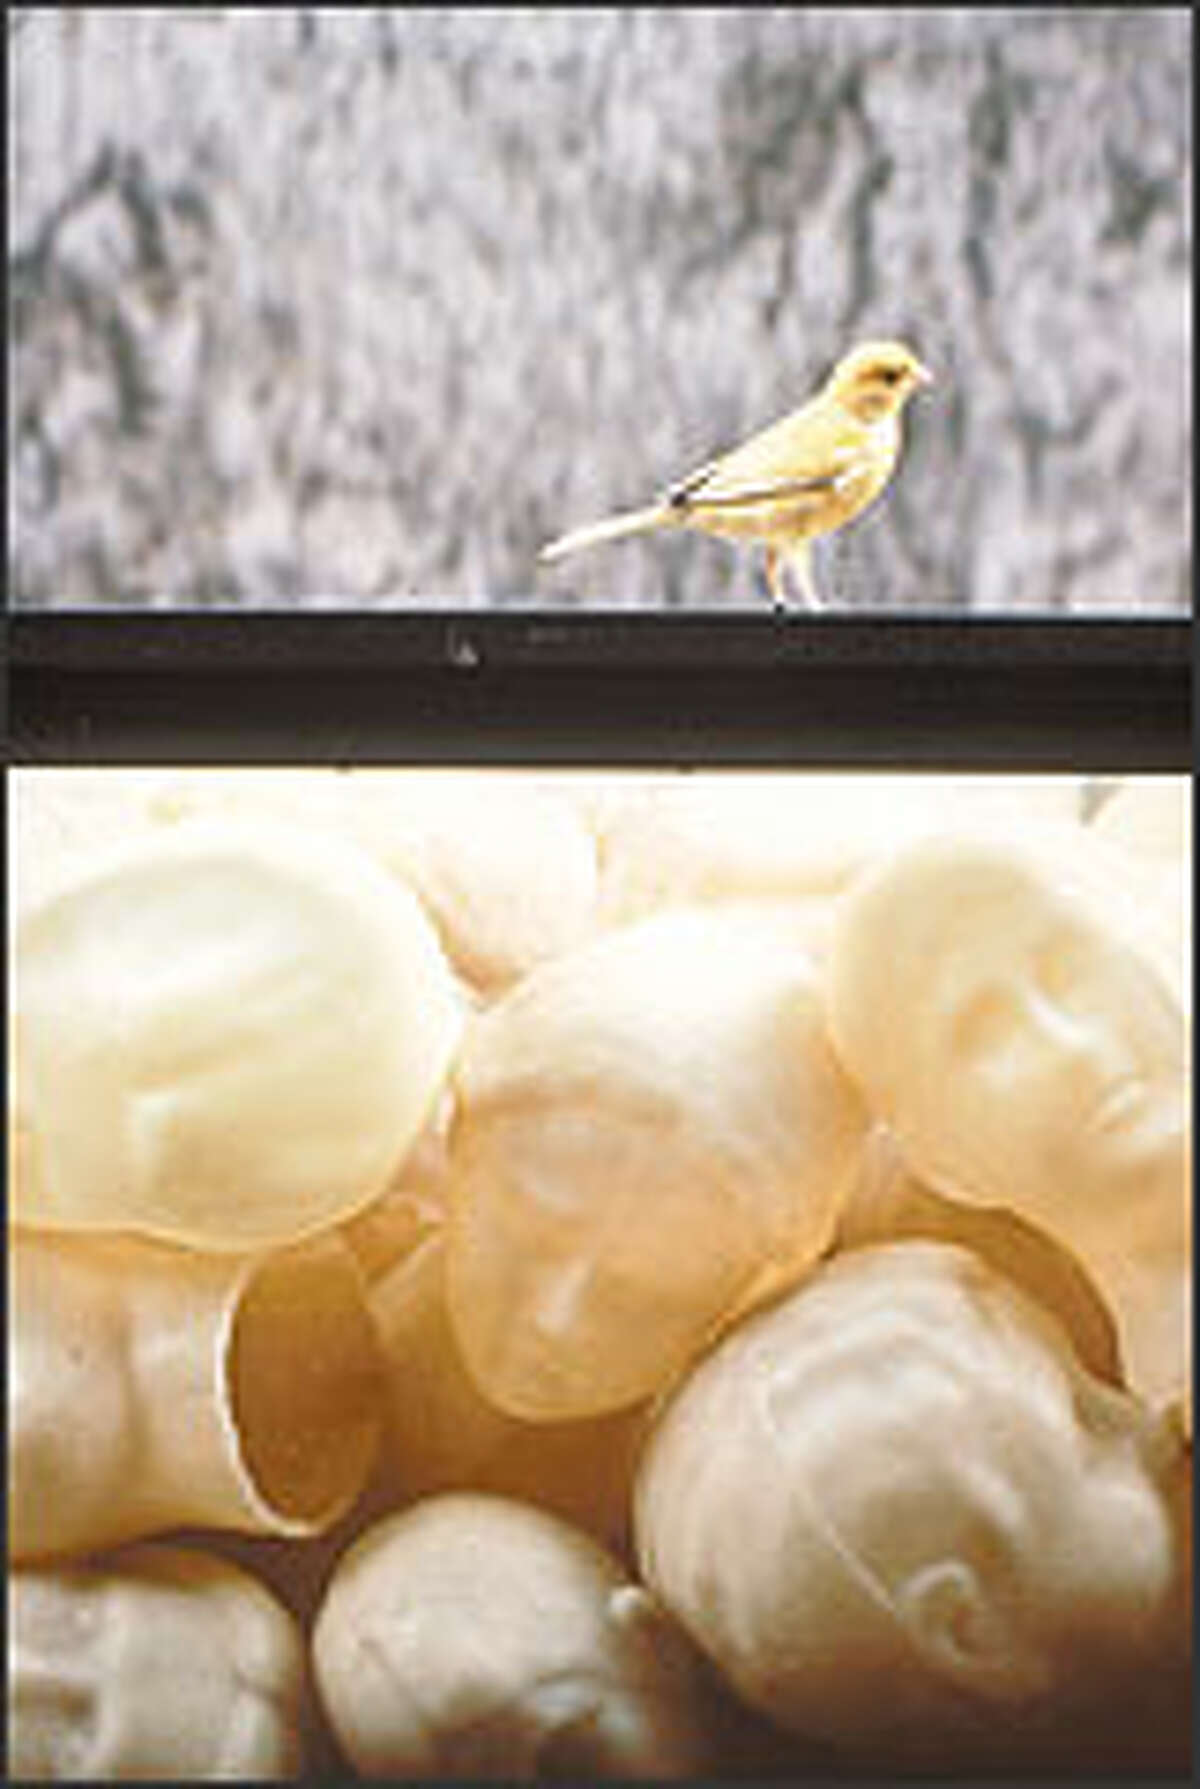 The only art exhibit in Seattle that has incited large protests was over the use of live canaries in a 1992 installation at the Henry Art Gallery by Ann Hamilton called "accountings."